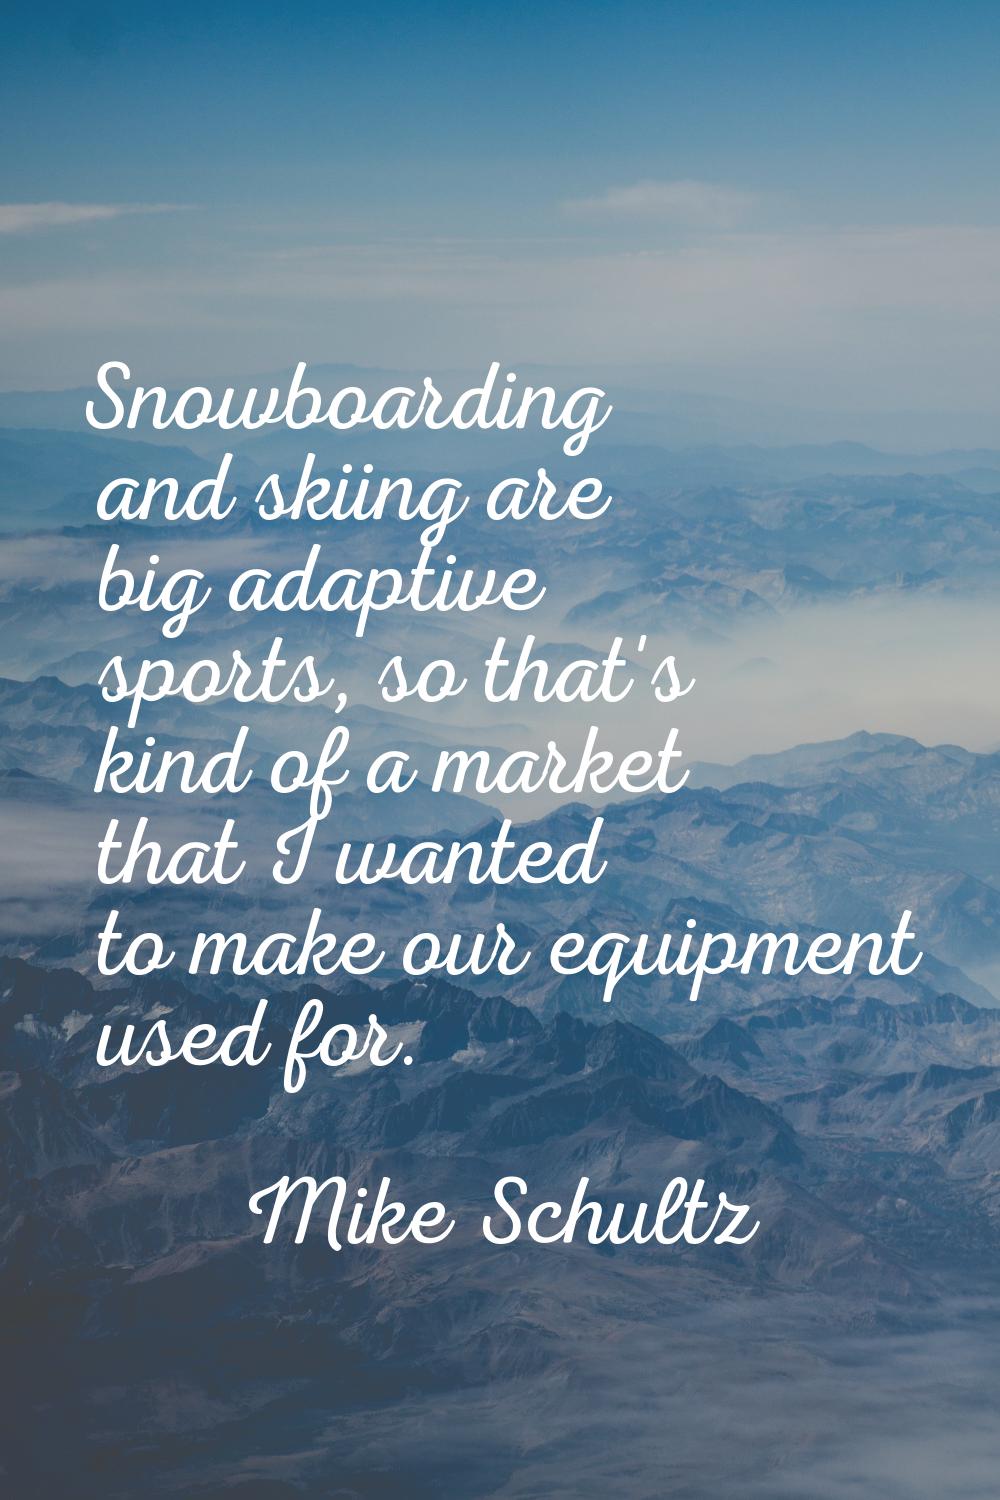 Snowboarding and skiing are big adaptive sports, so that's kind of a market that I wanted to make o